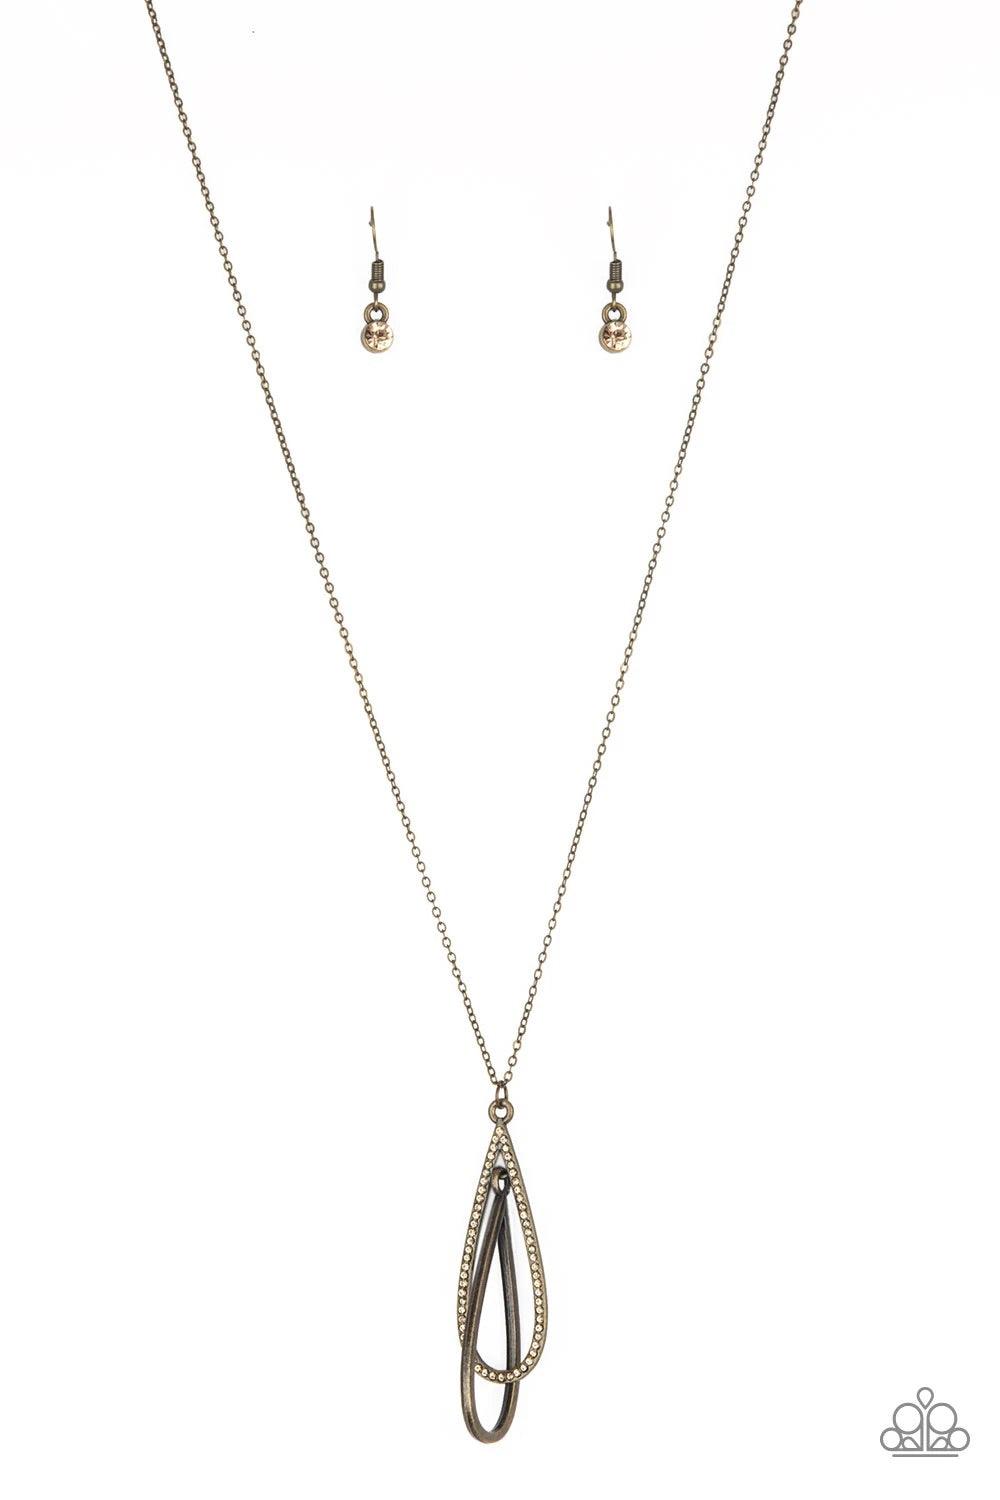 Paparazzi Accessories Step Into The Spotlight - Brass Infused with an elegantly elongated brass chain, a topaz rhinestone encrusted teardrop interlocks with a smooth brass teardrop, creating a refined pendant. Features an adjustable clasp closure. Sold as